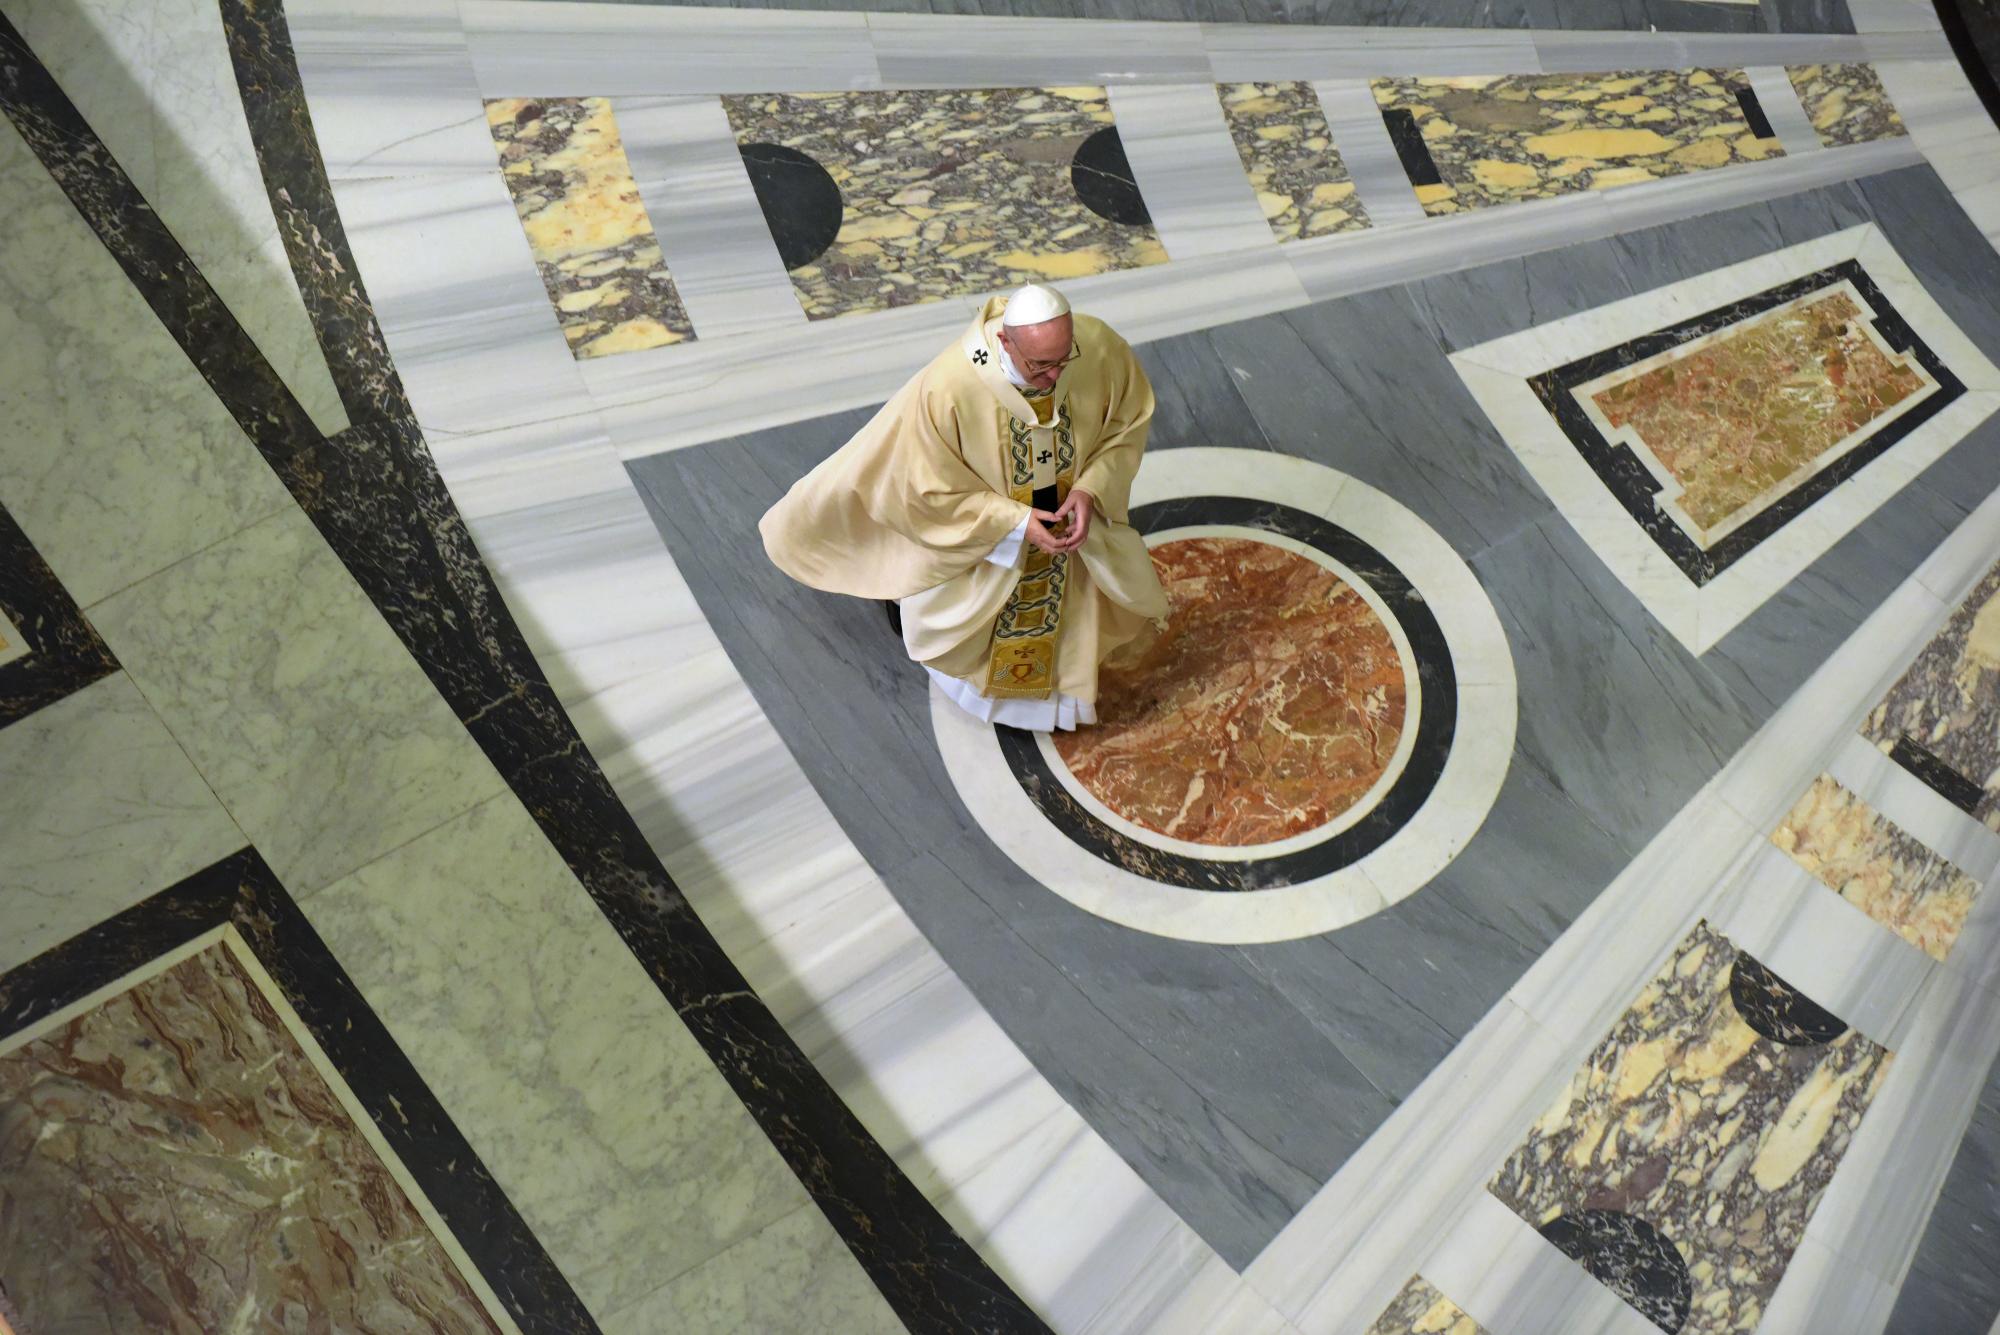 Pope Francis: behind the scenes​ ​in​ ​Vatican City –​ photo essay